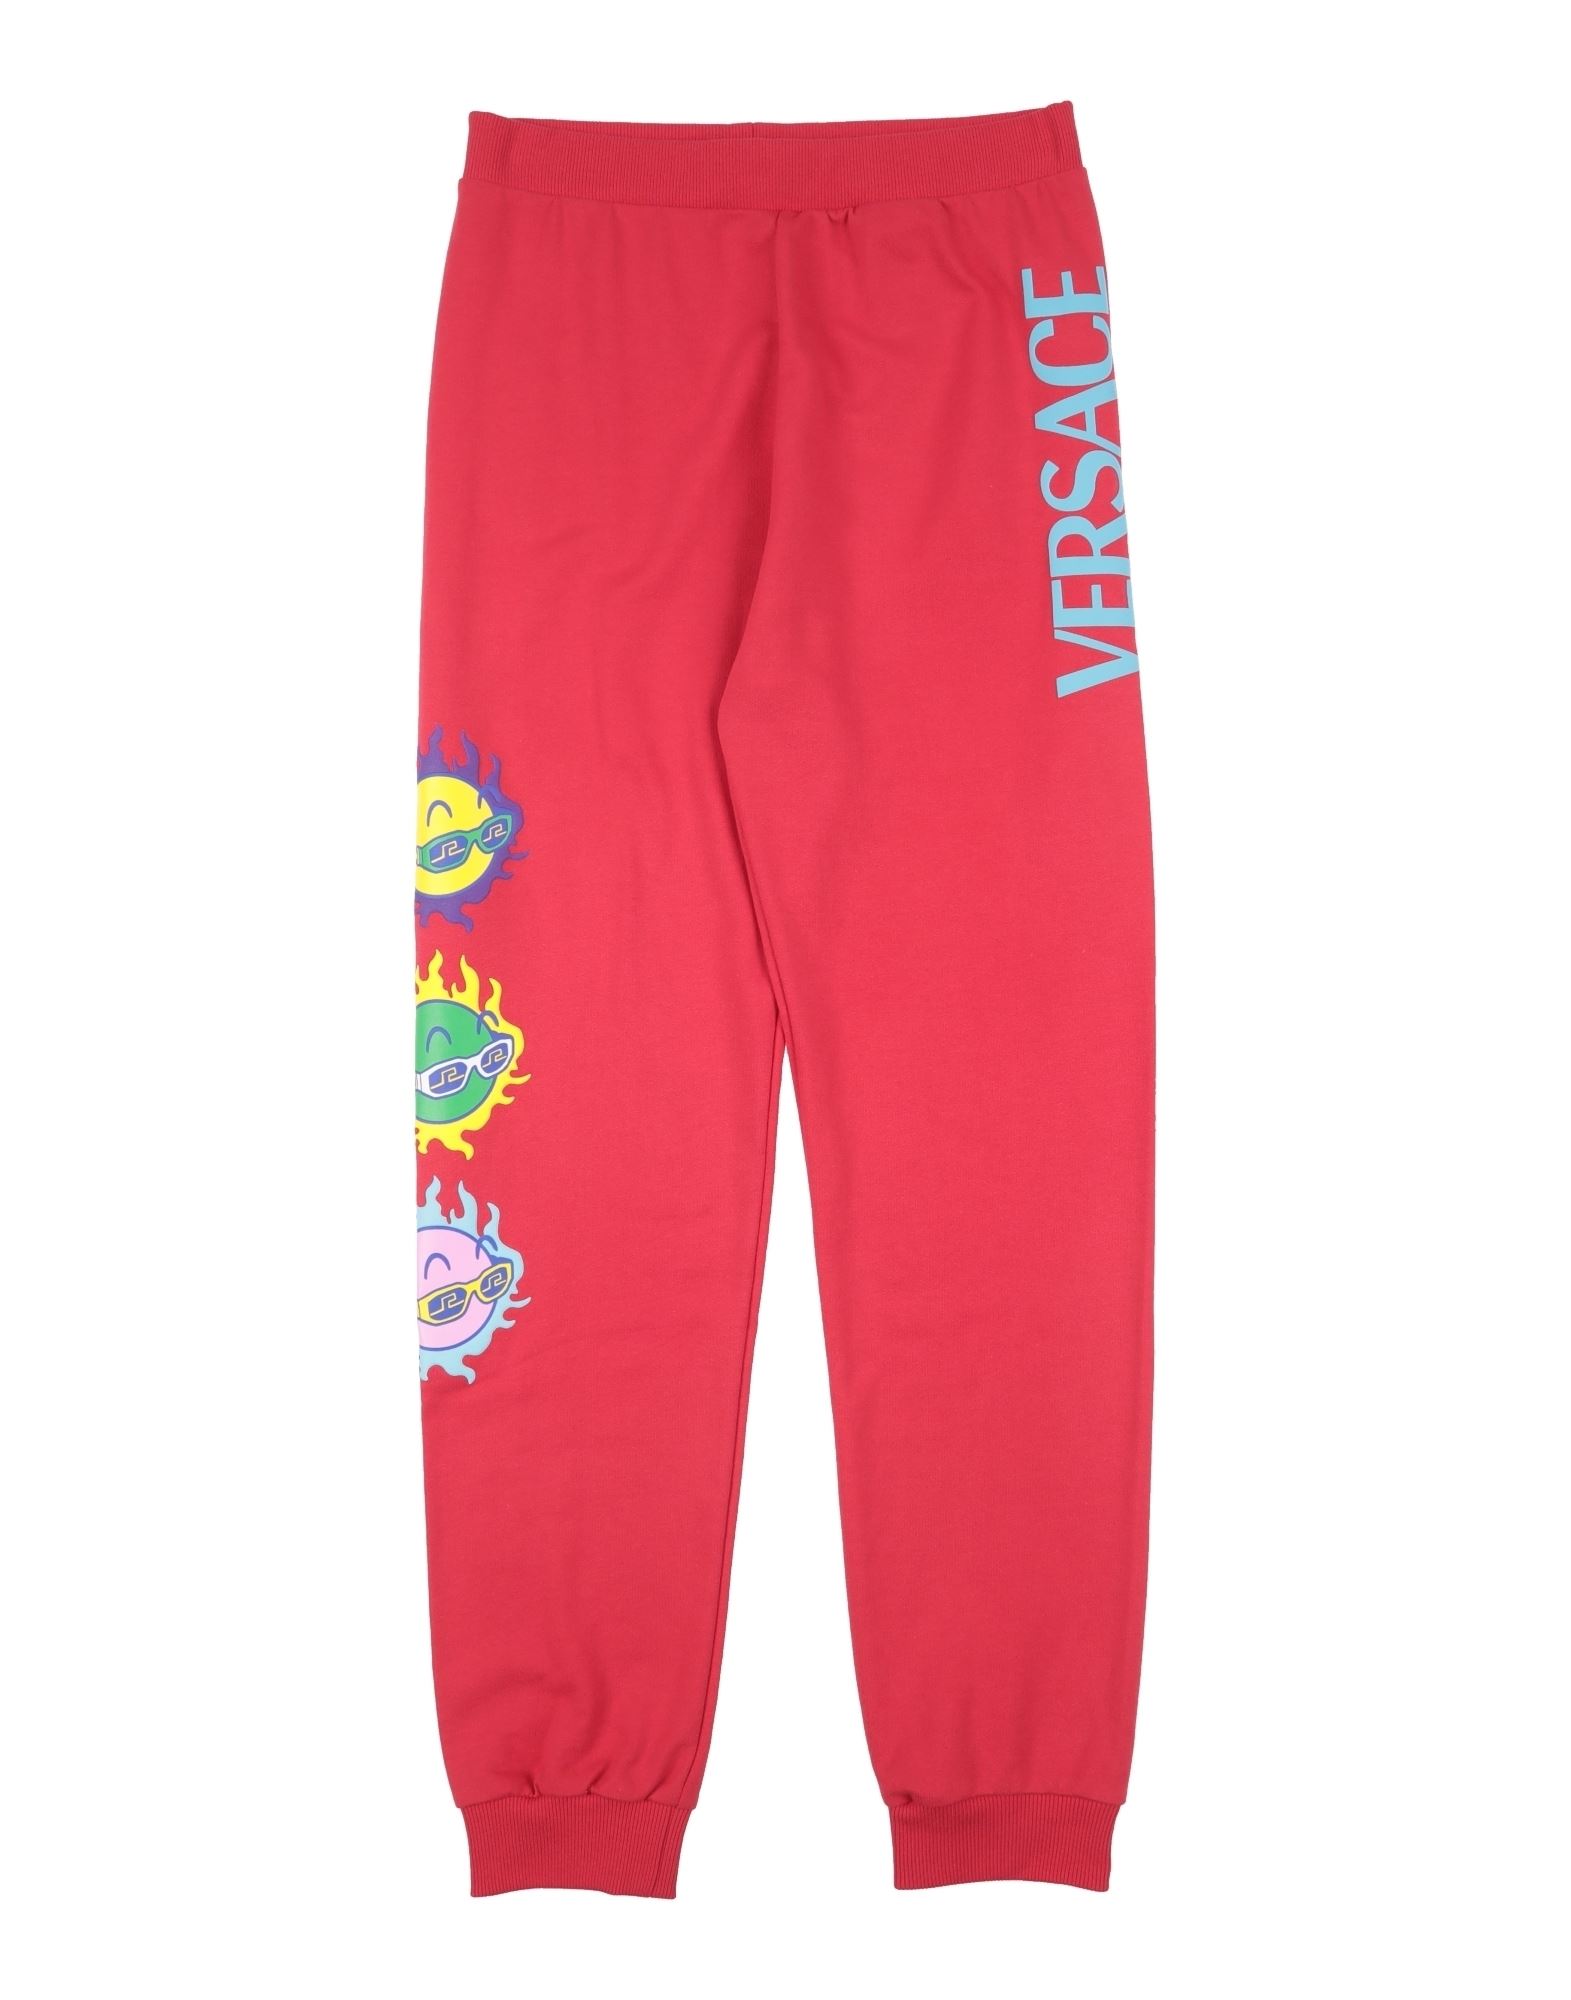 VERSACE YOUNG Hose Kinder Rot von VERSACE YOUNG